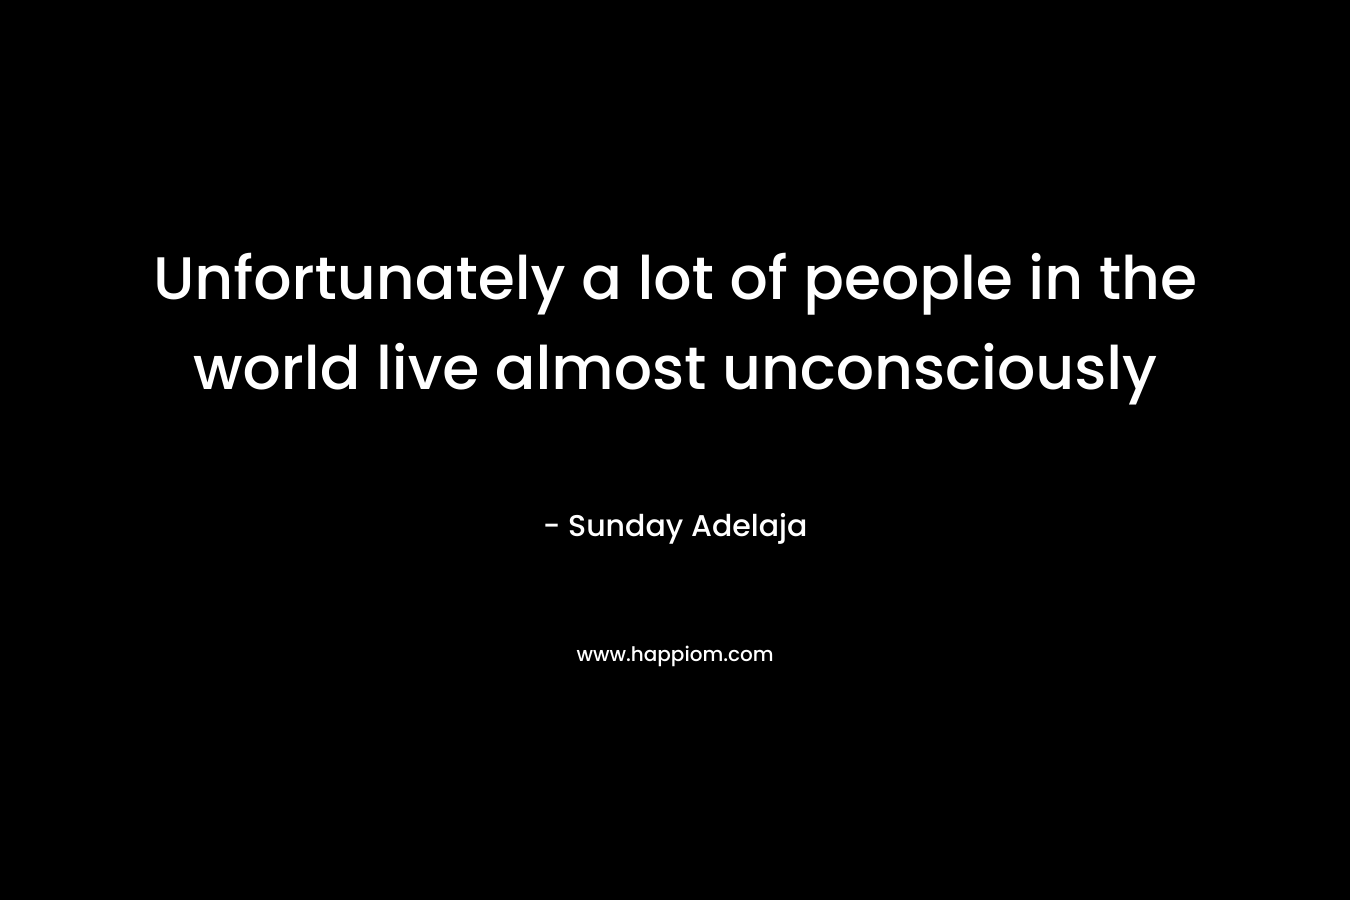 Unfortunately a lot of people in the world live almost unconsciously